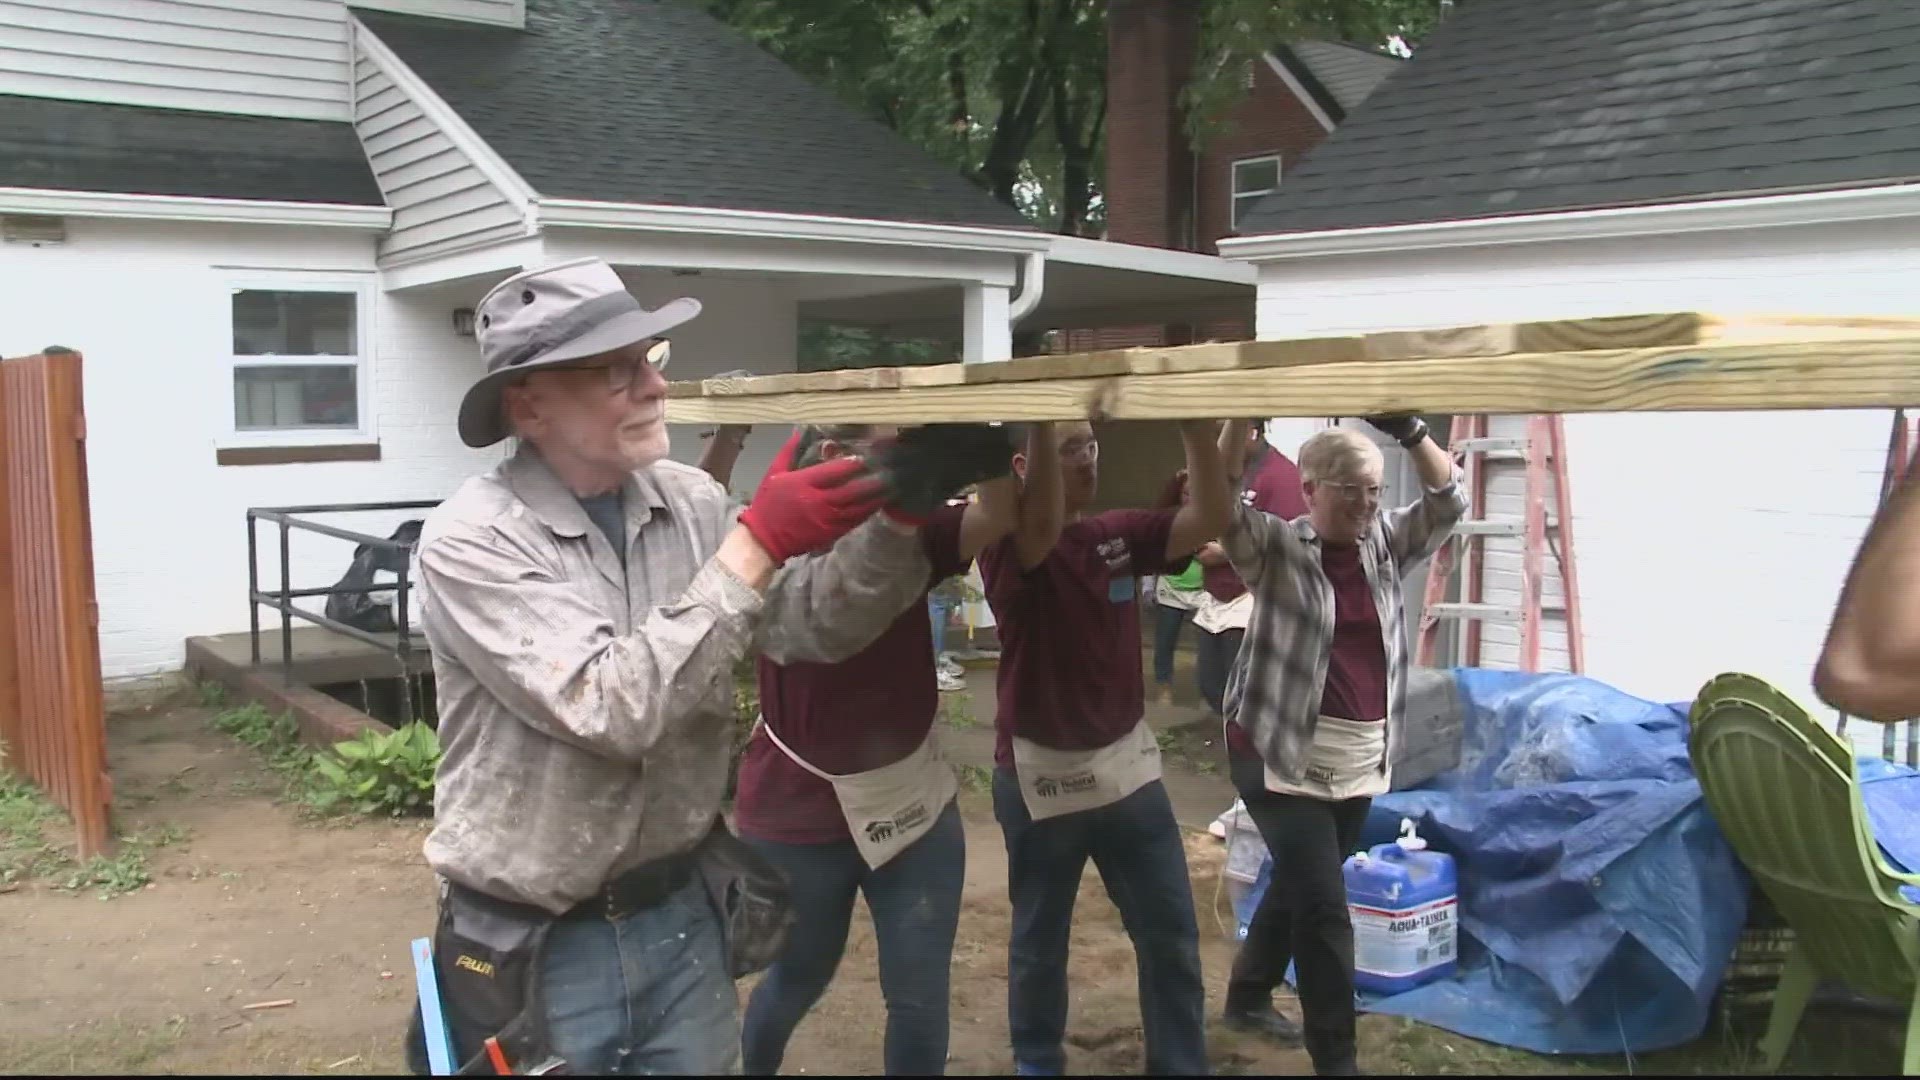 Women from the Metro Maryland chapter of Habitat for Humanity are
working alongside crews from Schneider Electric to convert a single-family home in Takoma Park.